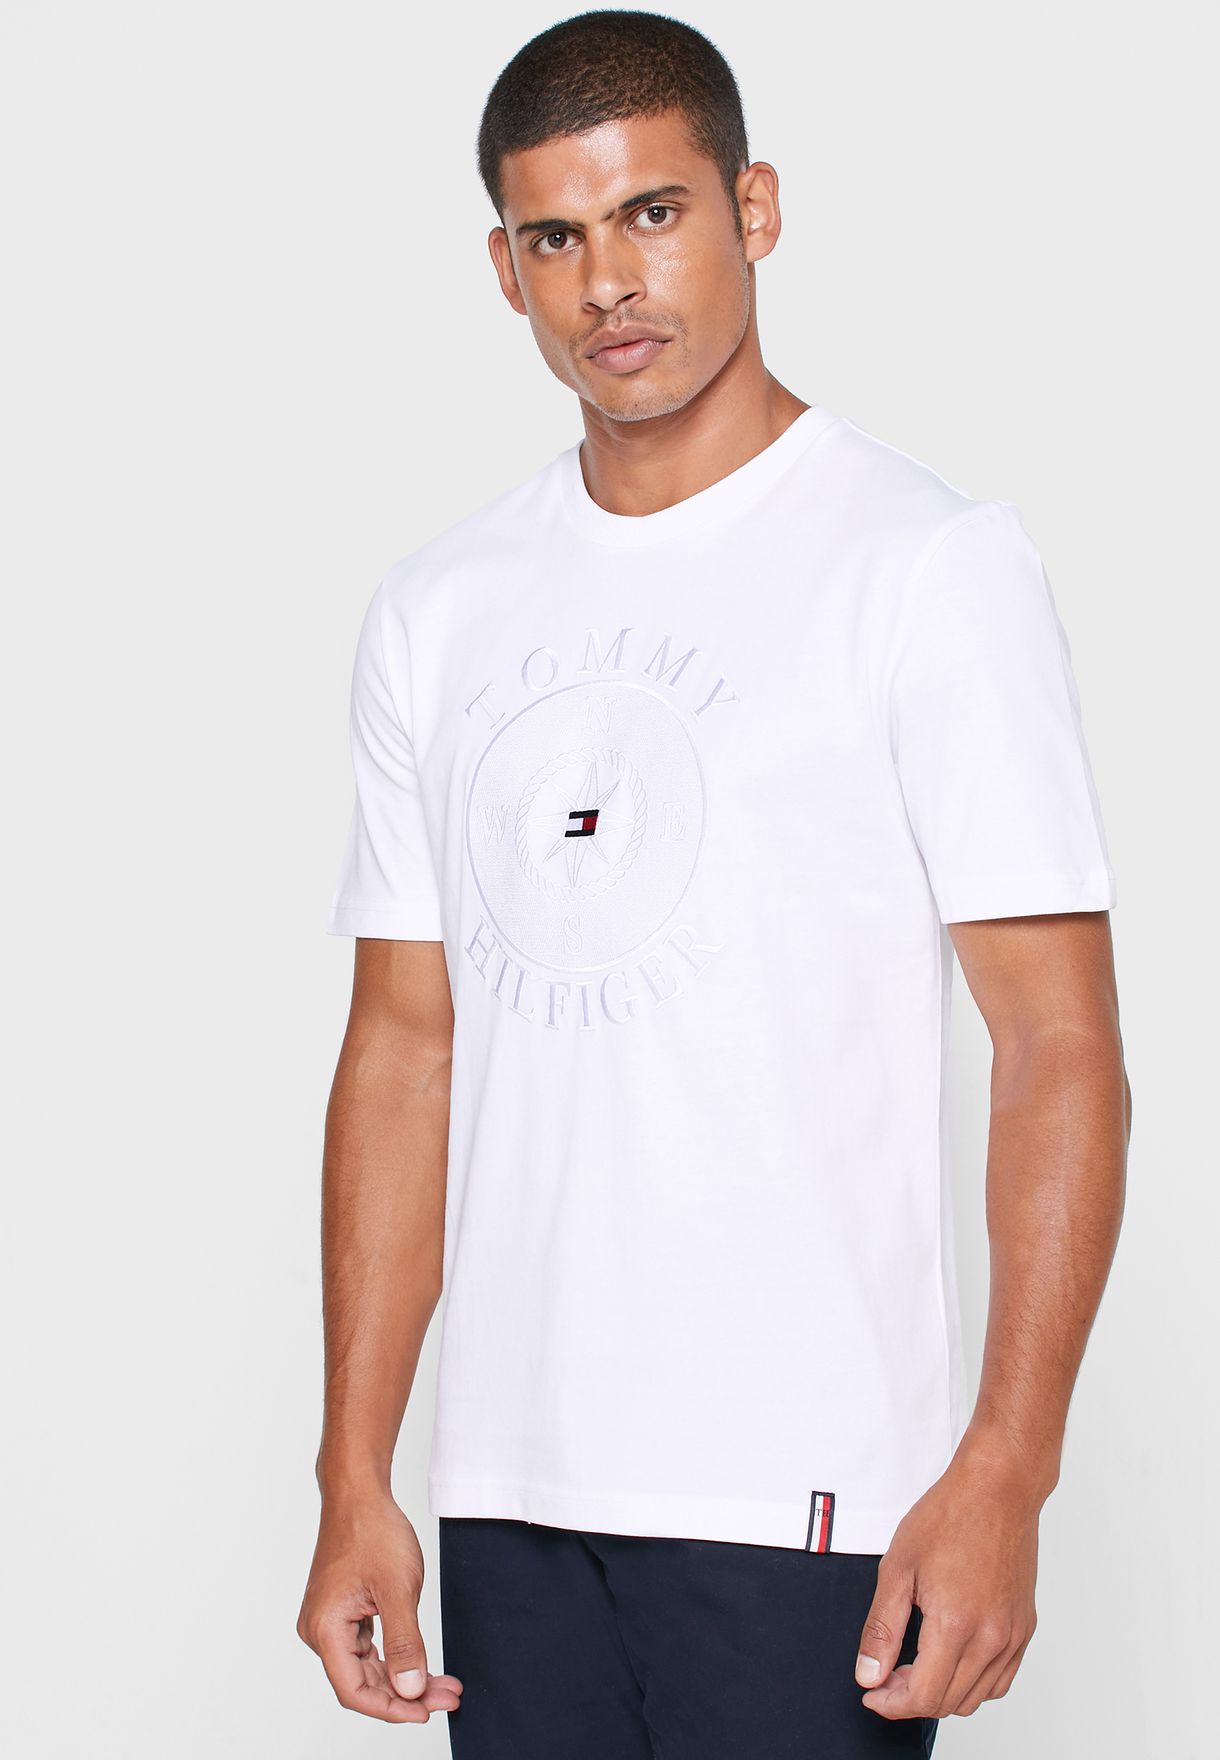 tommy hilfiger relaxed fit t shirt